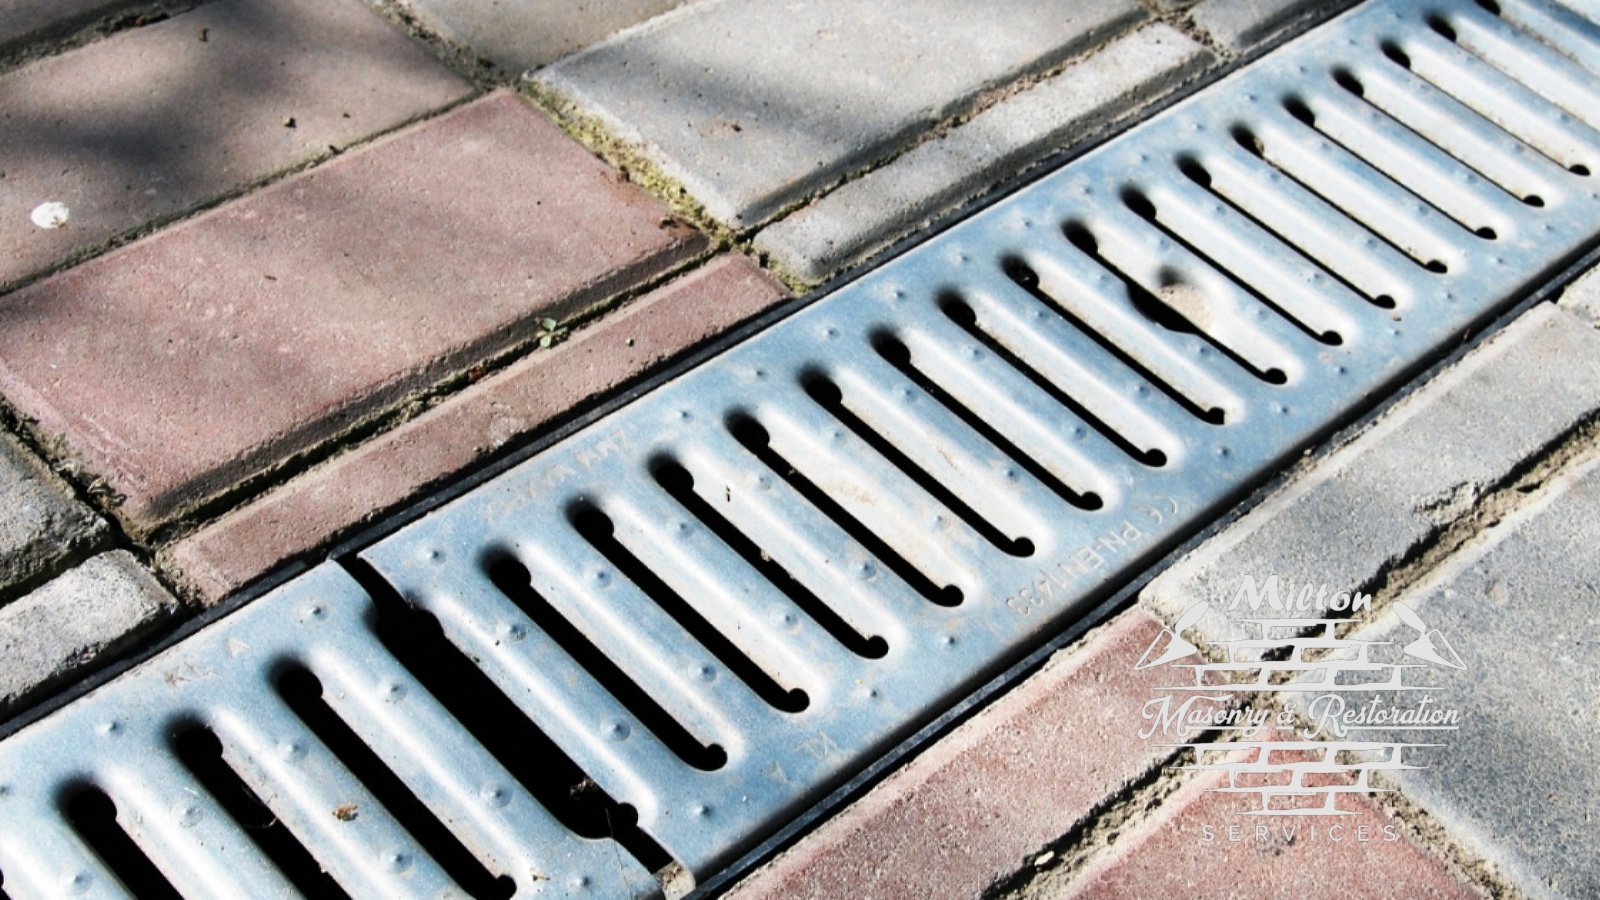 Drainage Services in Roslindale, Boston